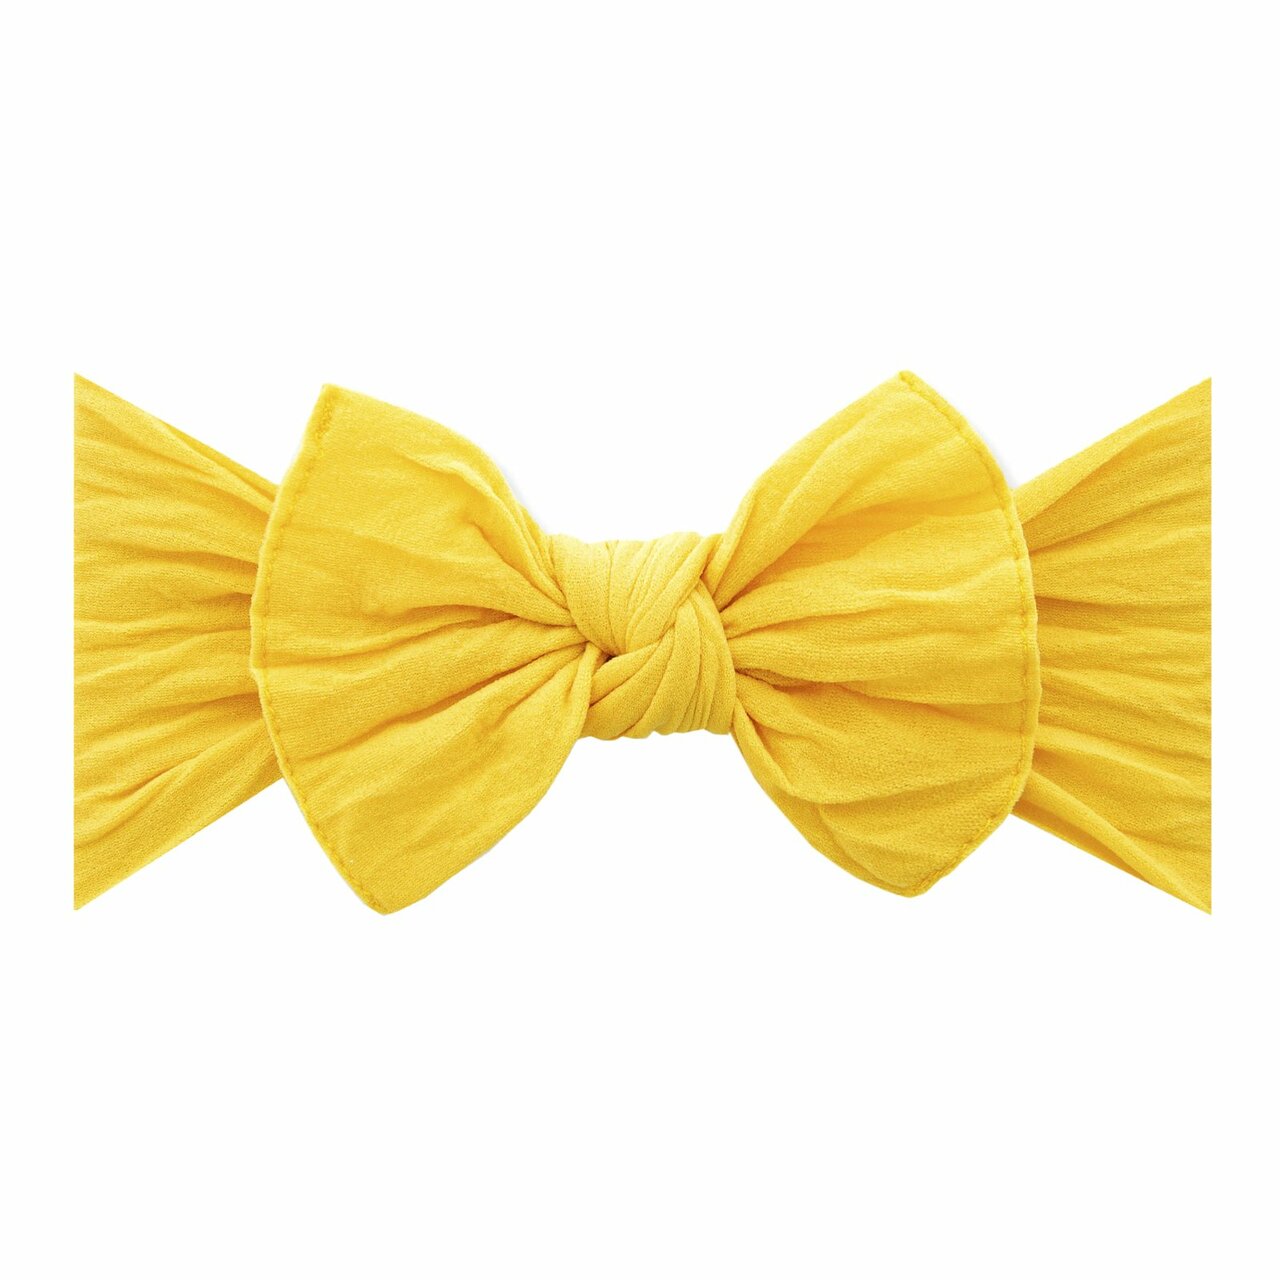 SpearmintLOVE’s baby Knot Bow, Canary